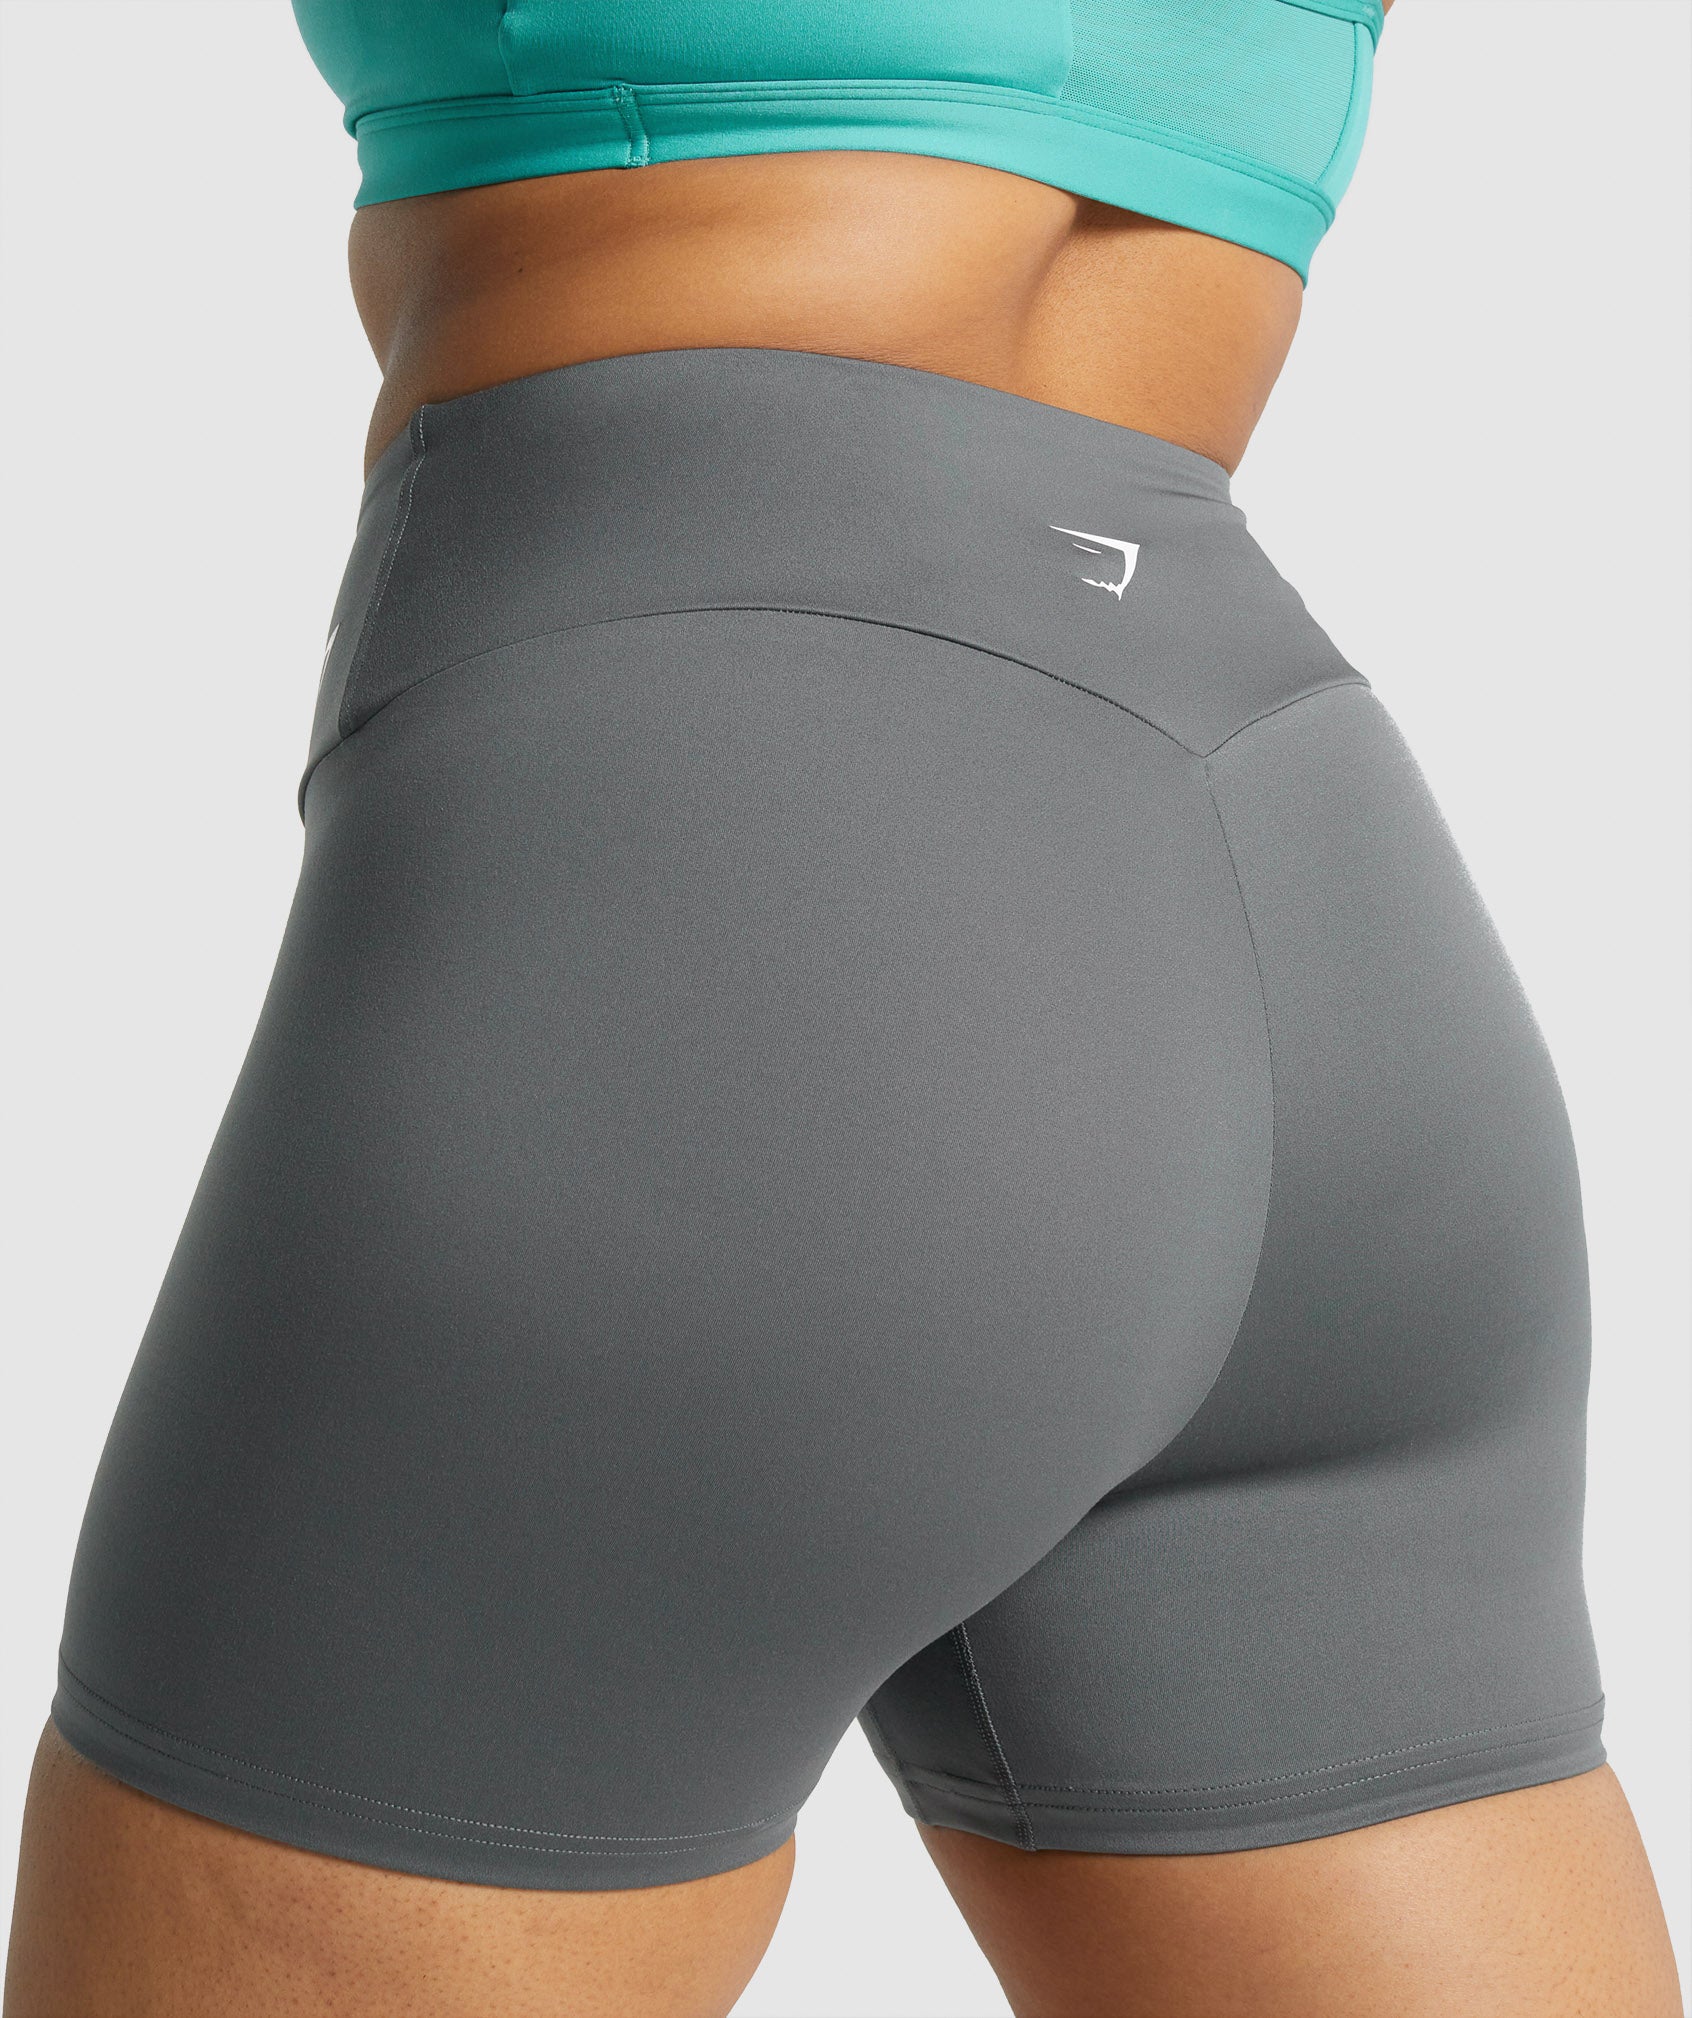 Training Shorts in Charcoal Grey - view 5